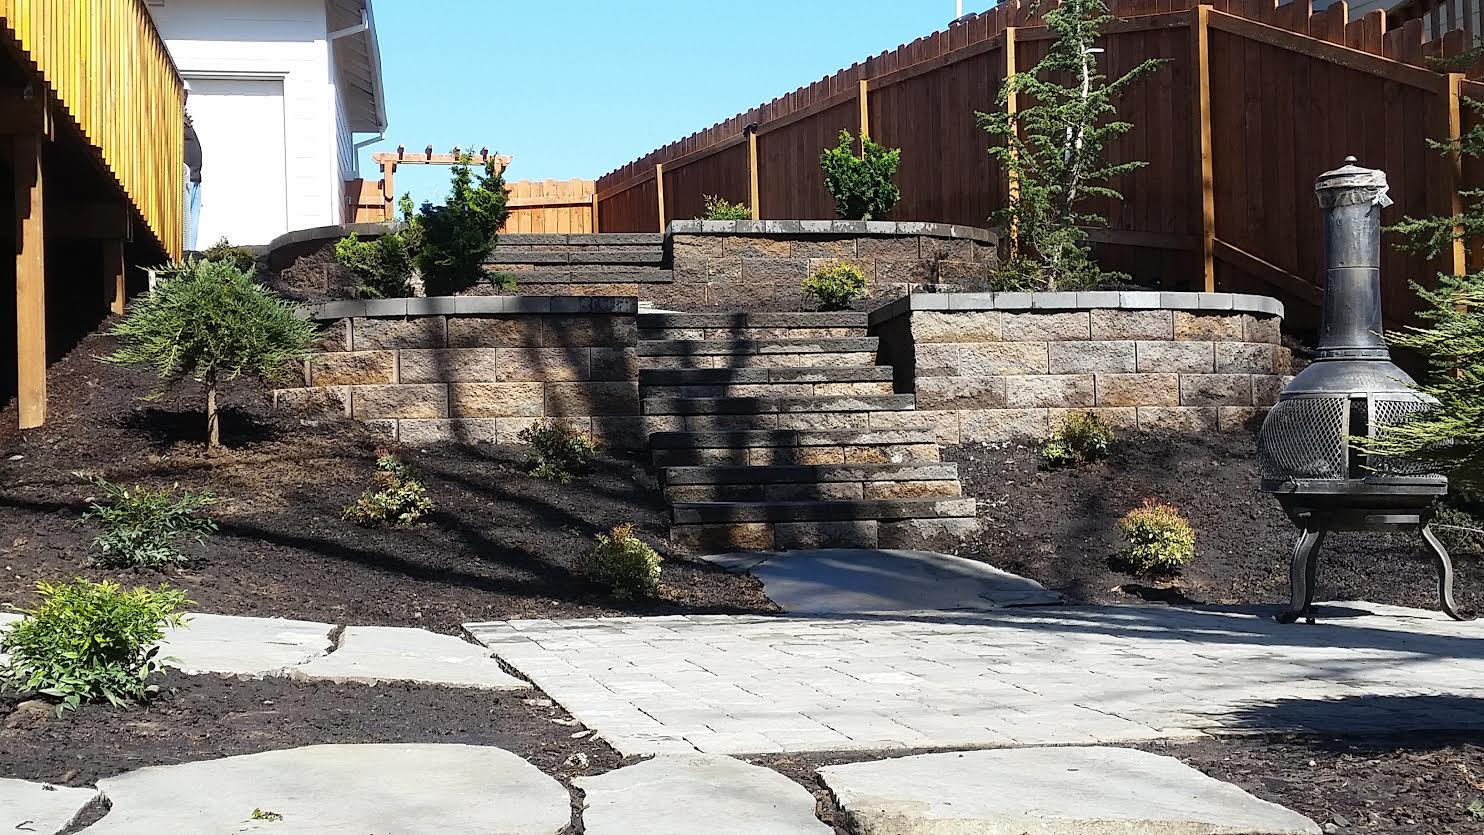 -hardscapes -landscaping- pavers- retaining walls.